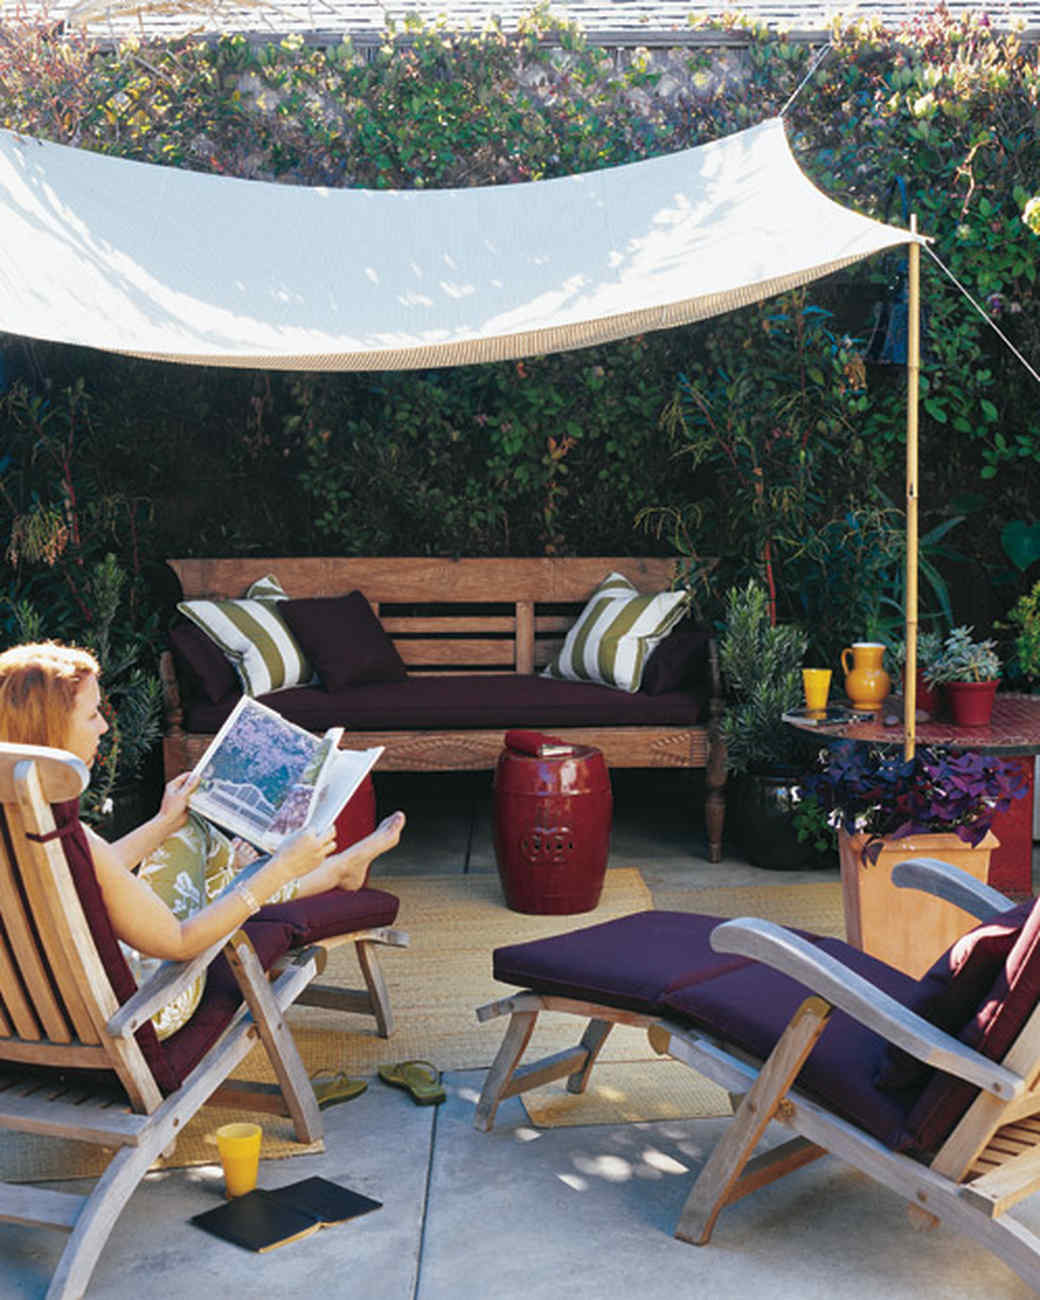 DIY Outdoor Shade Canopy
 A Slice of Shade Creating Canopies